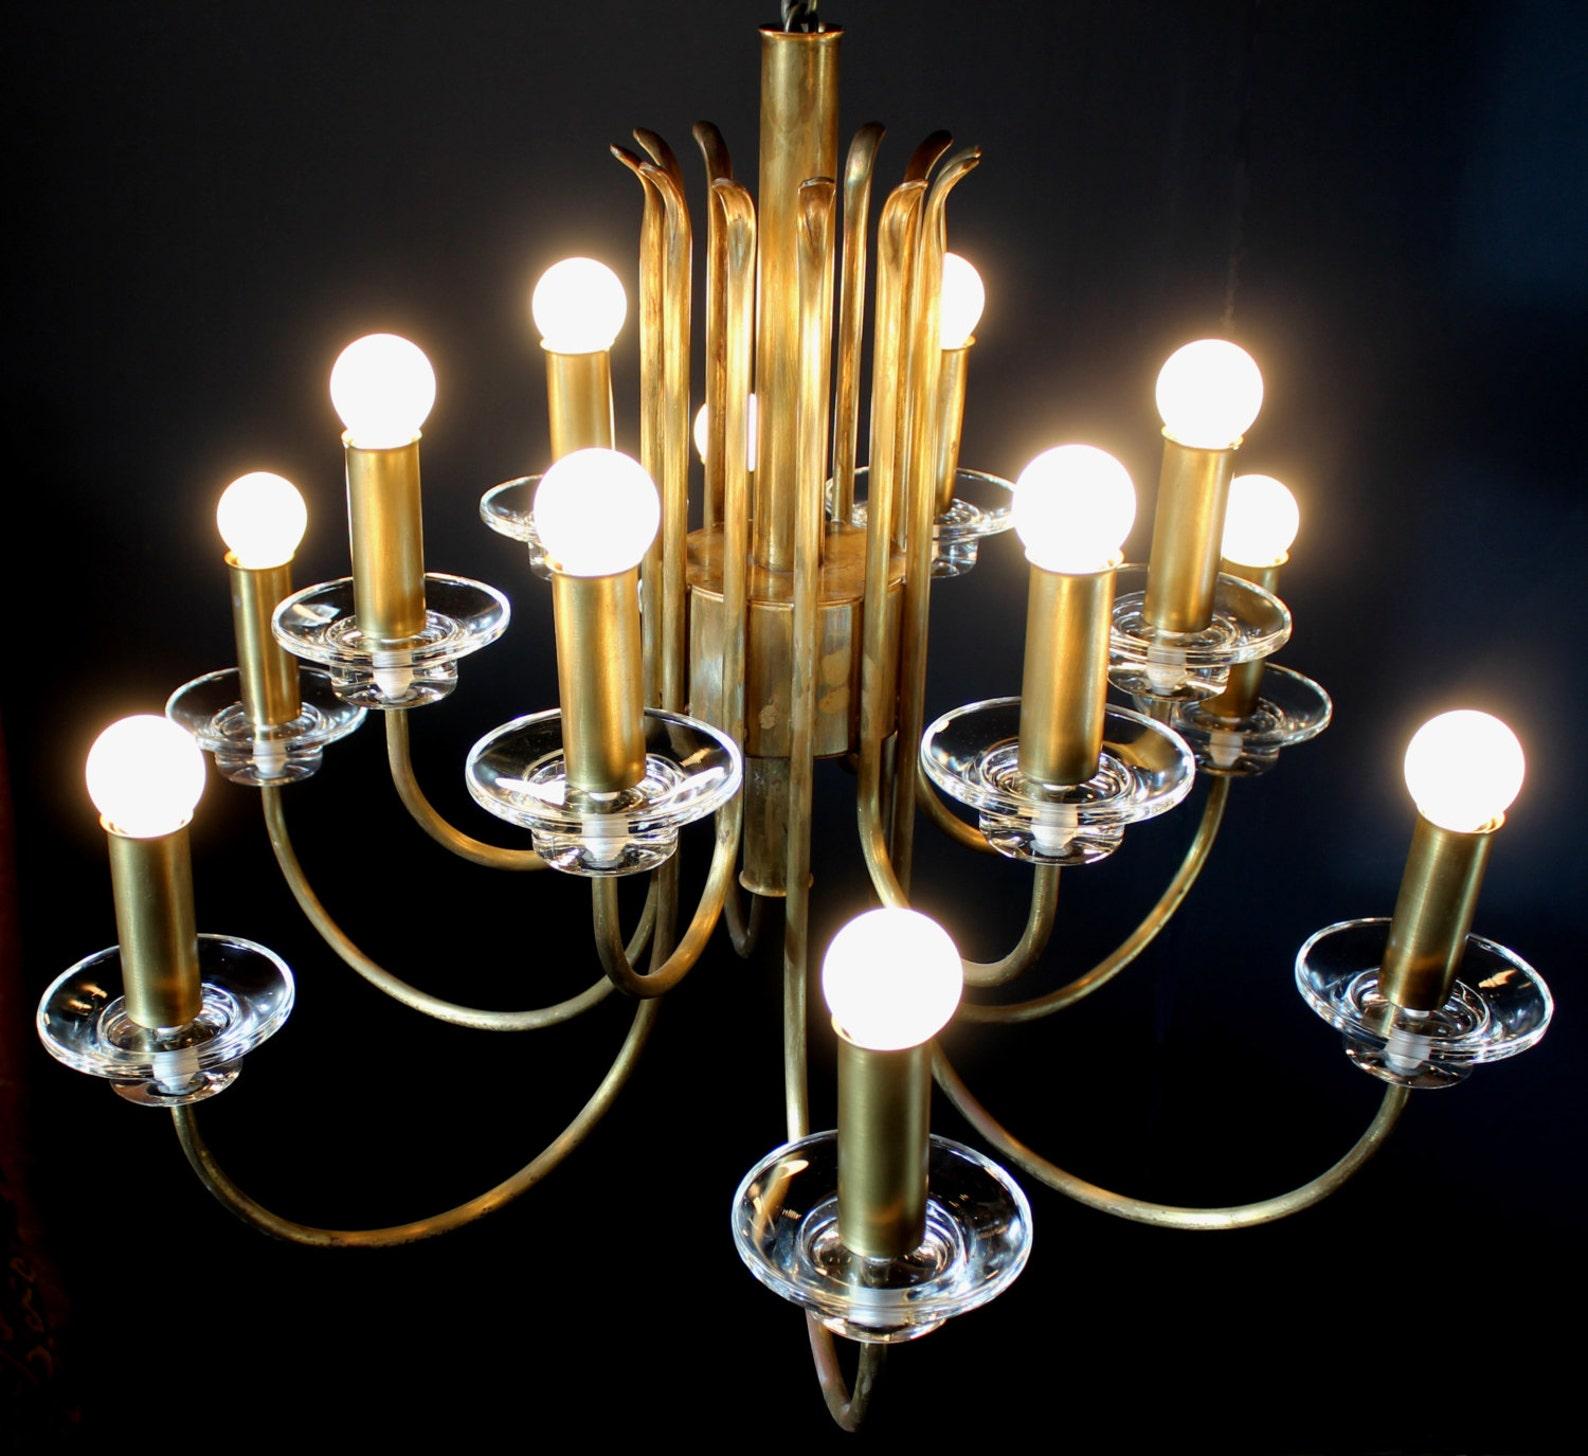 12 Lights (e14) minimalistic German brass chandelier 1950's.

The chandelier impresses with clear forms, noble materials and perfect craftmanship. It is in nearly perfect original condition and was carefully cleaned and rewired. The aged and